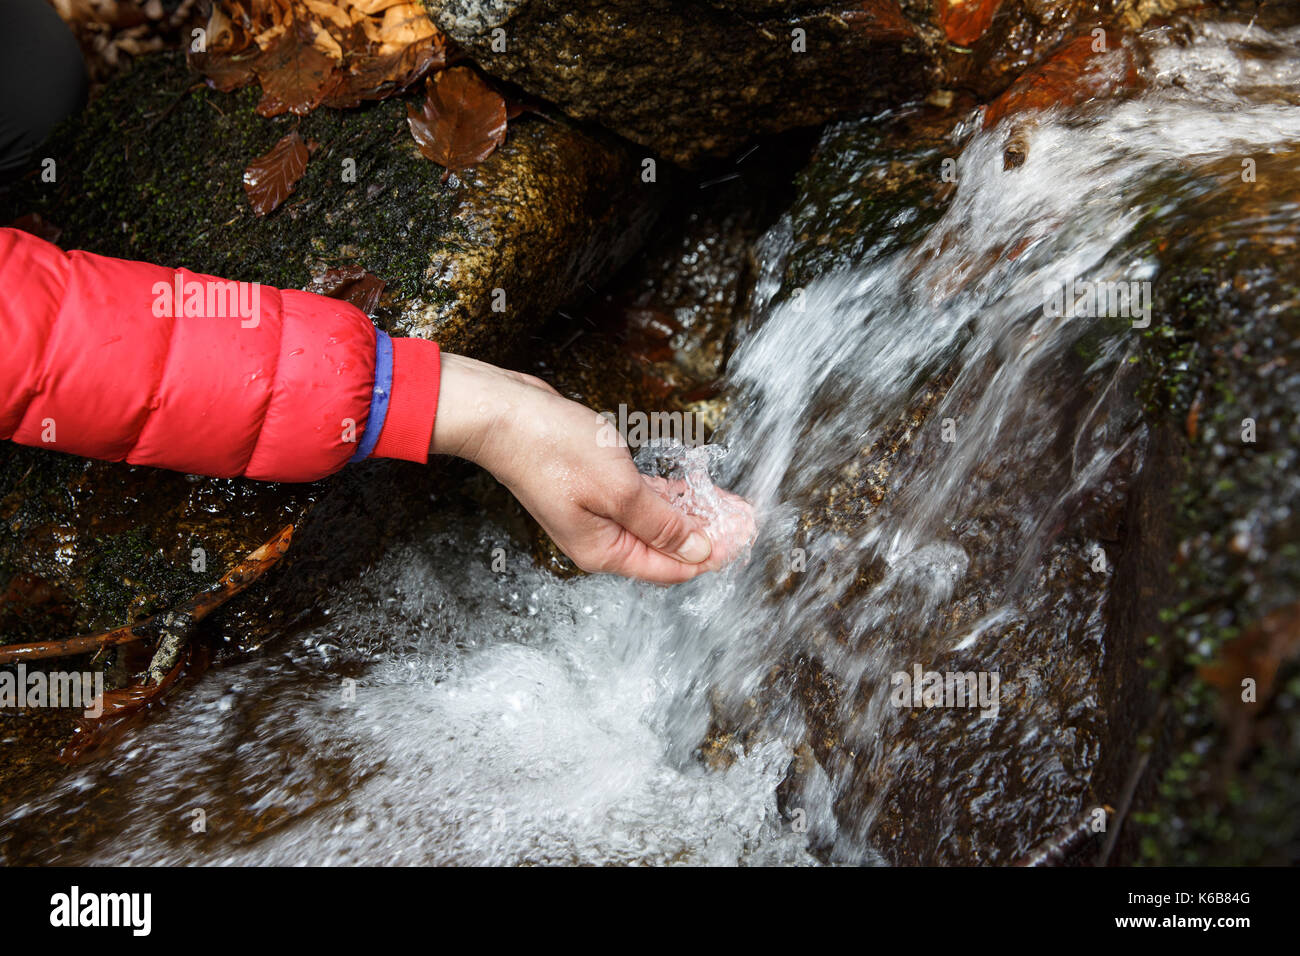 Thirsty hiker drinking water from a crystal clear stream in the mountains. Adventure, fundamental right to water, back to nature and natural lifestyle Stock Photo